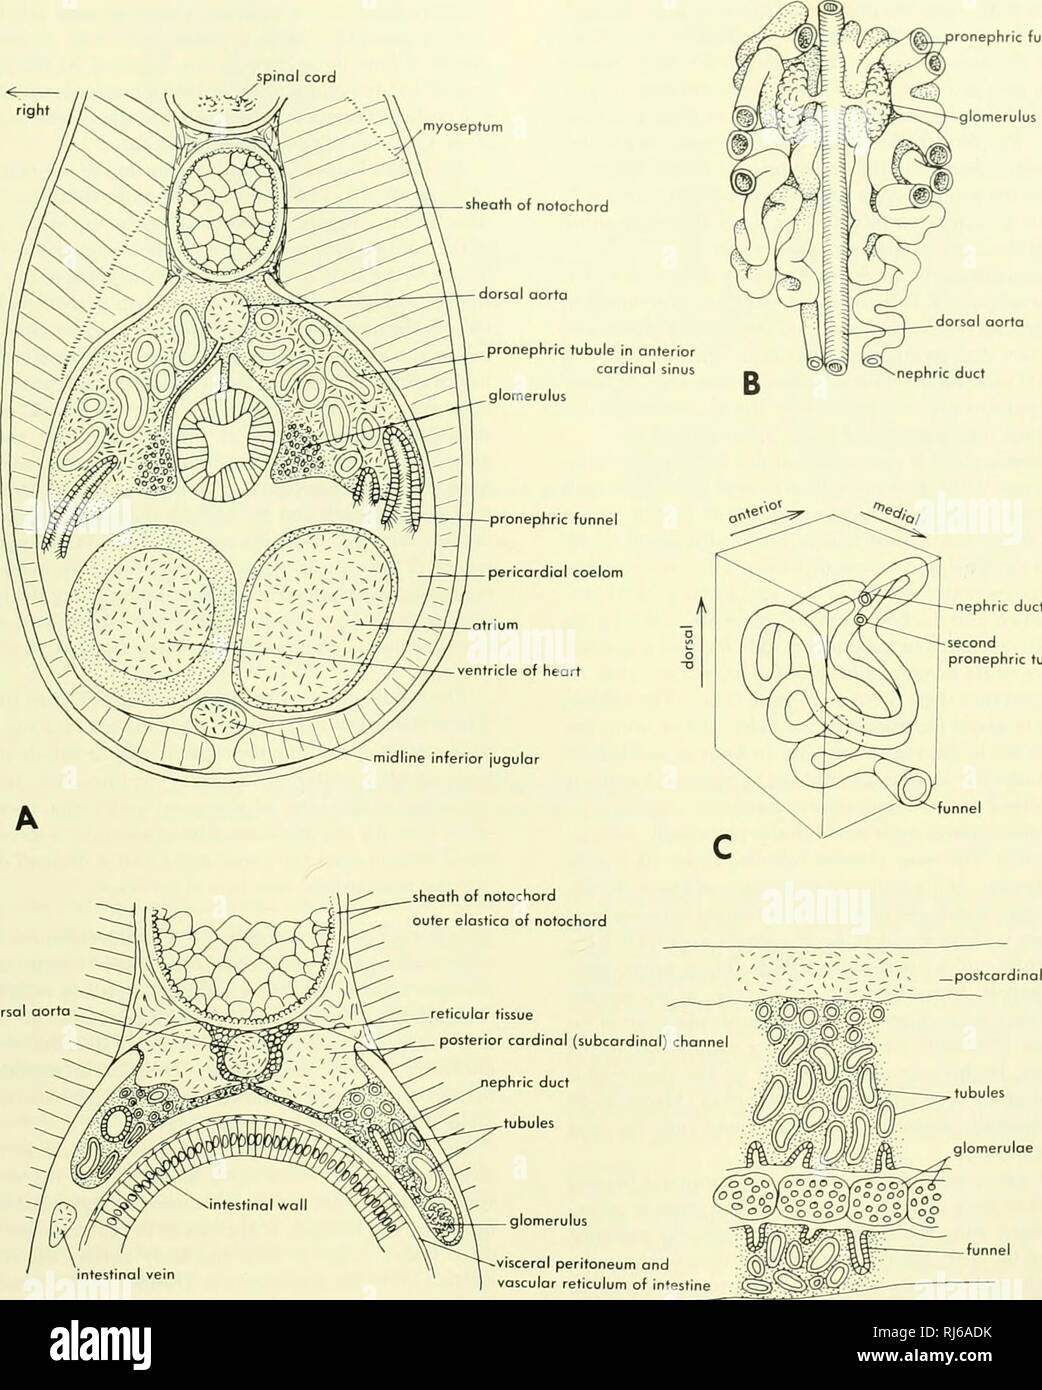 . Chordate morphology. Morphology (Animals); Chordata. Tonephric funnels glomerulus dorsal aorta. nephric duct second pronephric tubule dorsal aorta Figure 10-29. Development of the kidney of the lamprey. A, cross section of 15-mm larva; B, ventral view of pronephric tubules as they lie in the pronephric sinus; C, stereodicgrom of the anterior pronephric tubule of a 15-mm larvo; D, cross section in the mesonephric region of a 15-mm larva, about middle of body; E, parasagittal section of a well-developed mesonephros. (E after Gerard, 1954) THE EXCRETORY SYSTEM • 315. Please note that these imag Stock Photo